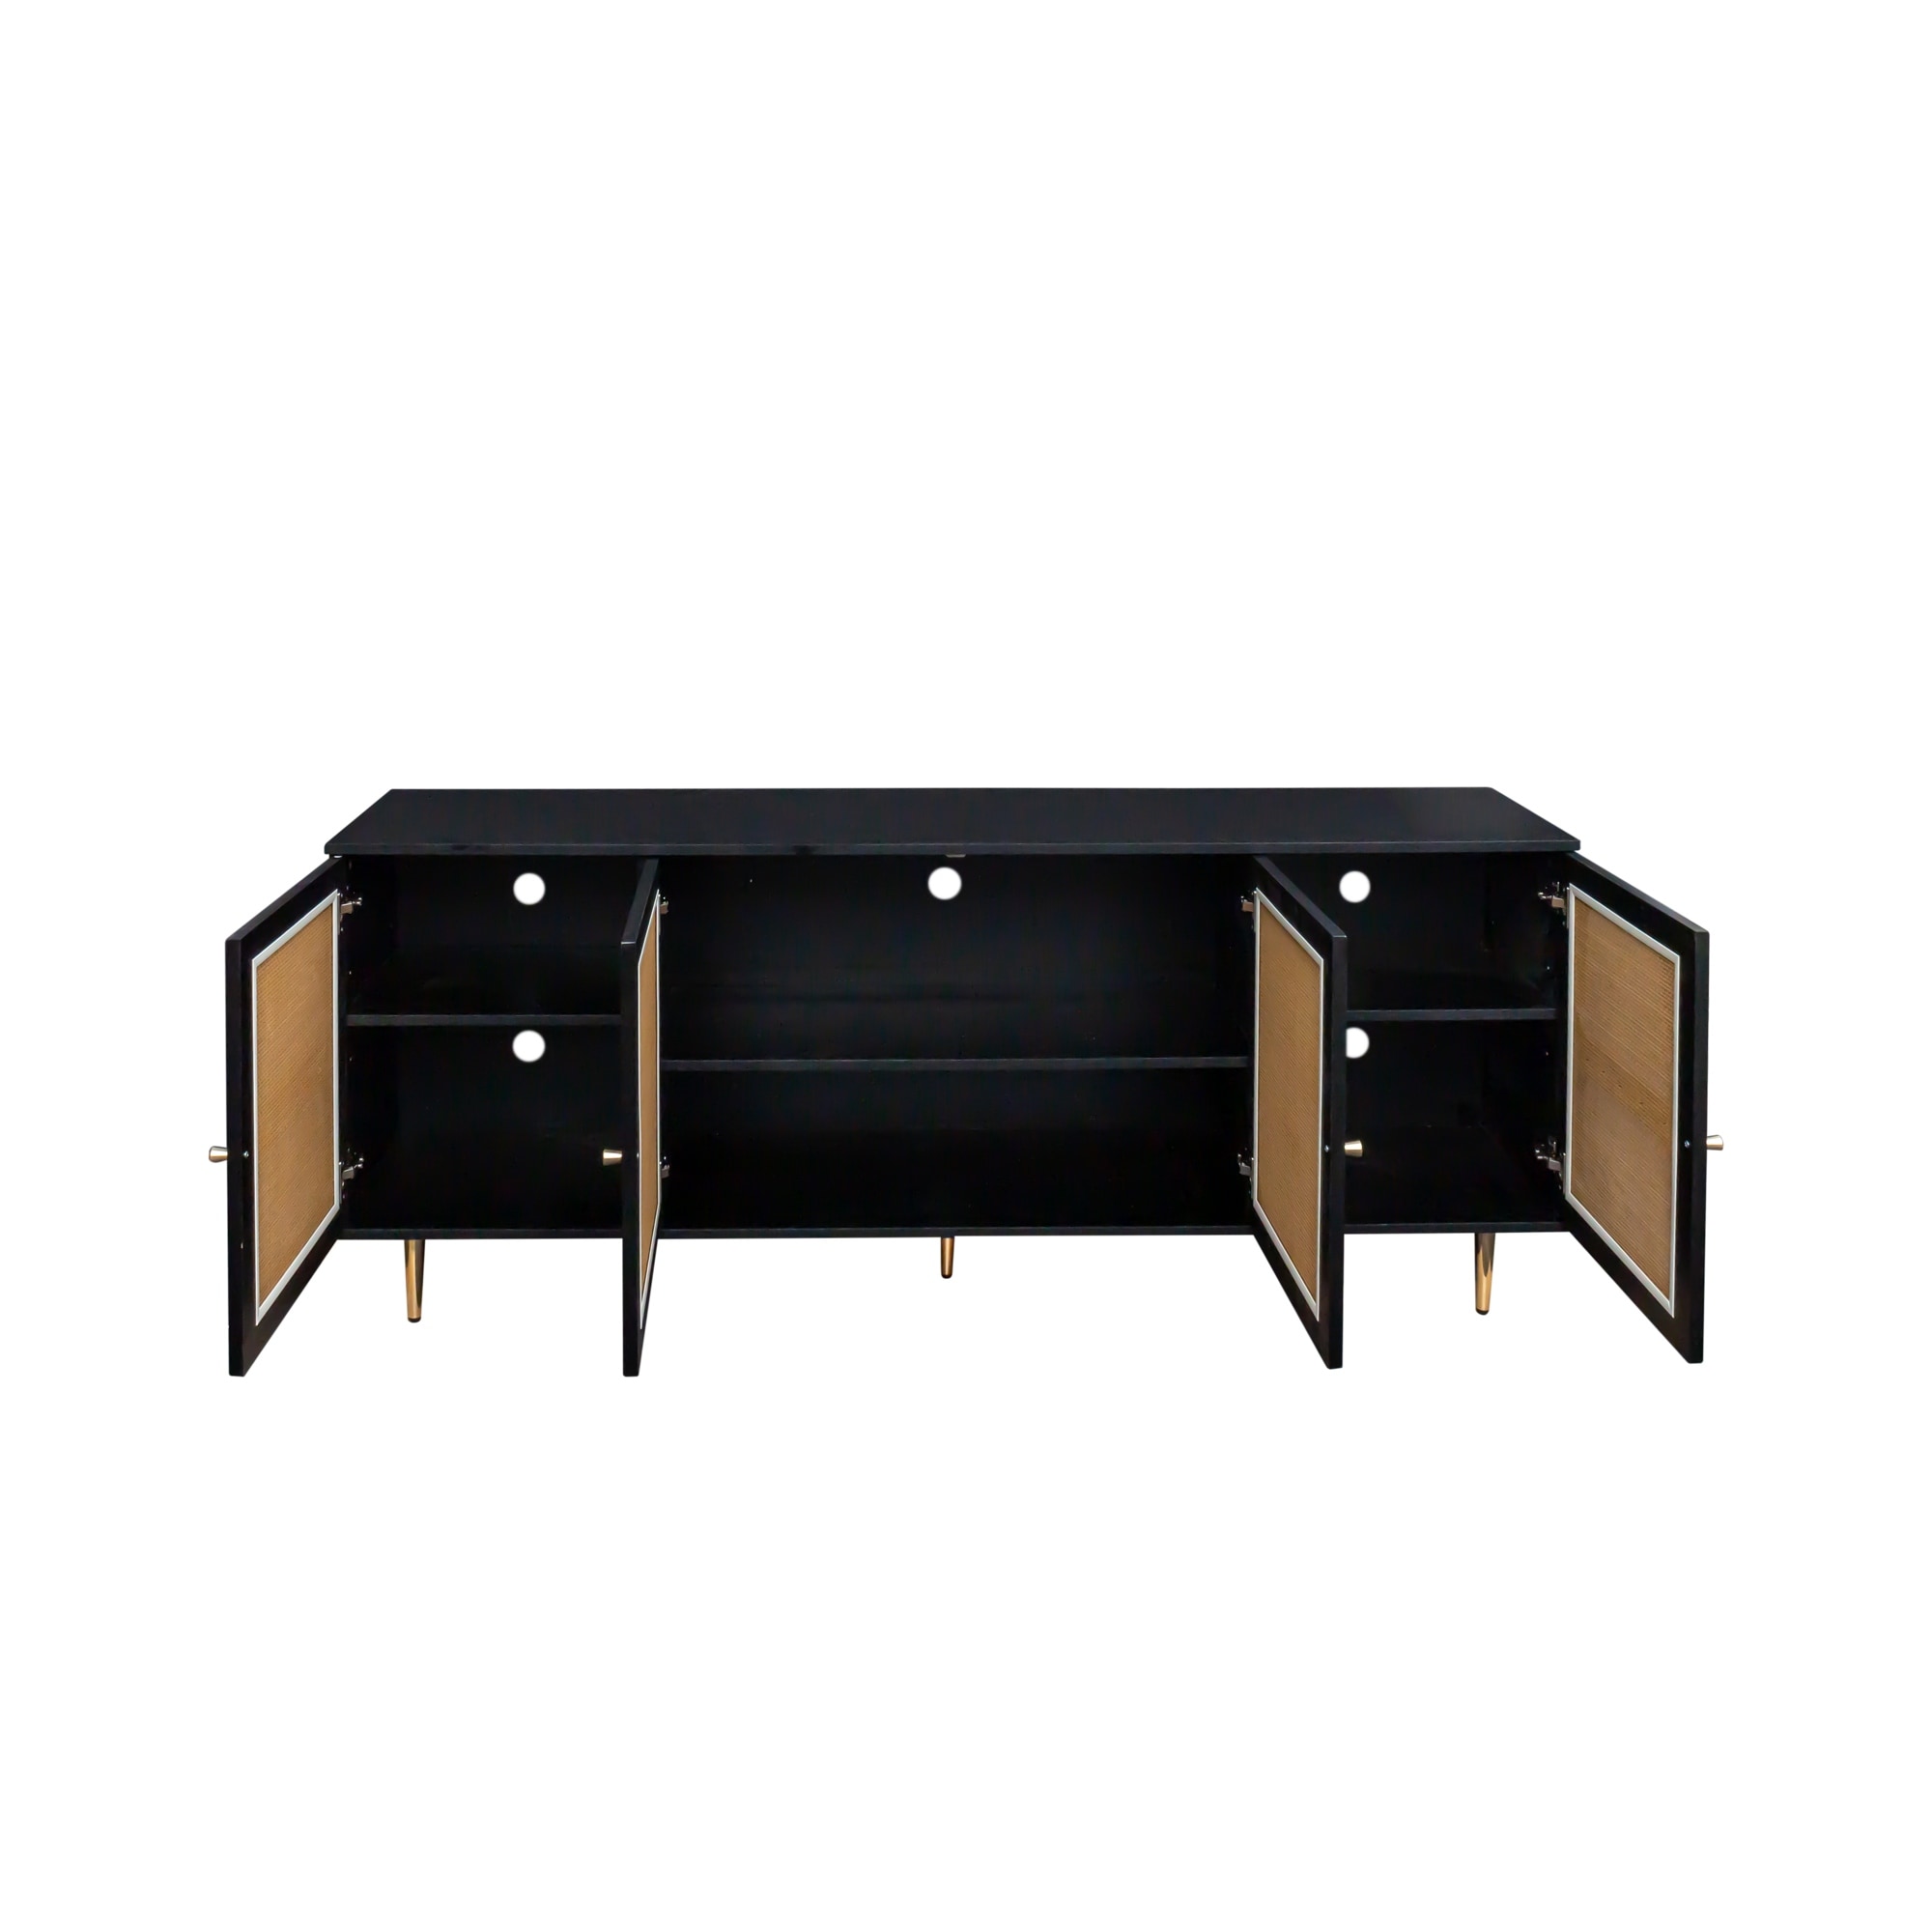 Black Rattan TV Stand, Sideboard Buffet Cabinet with Adjustable Shelves, Spacious Storage